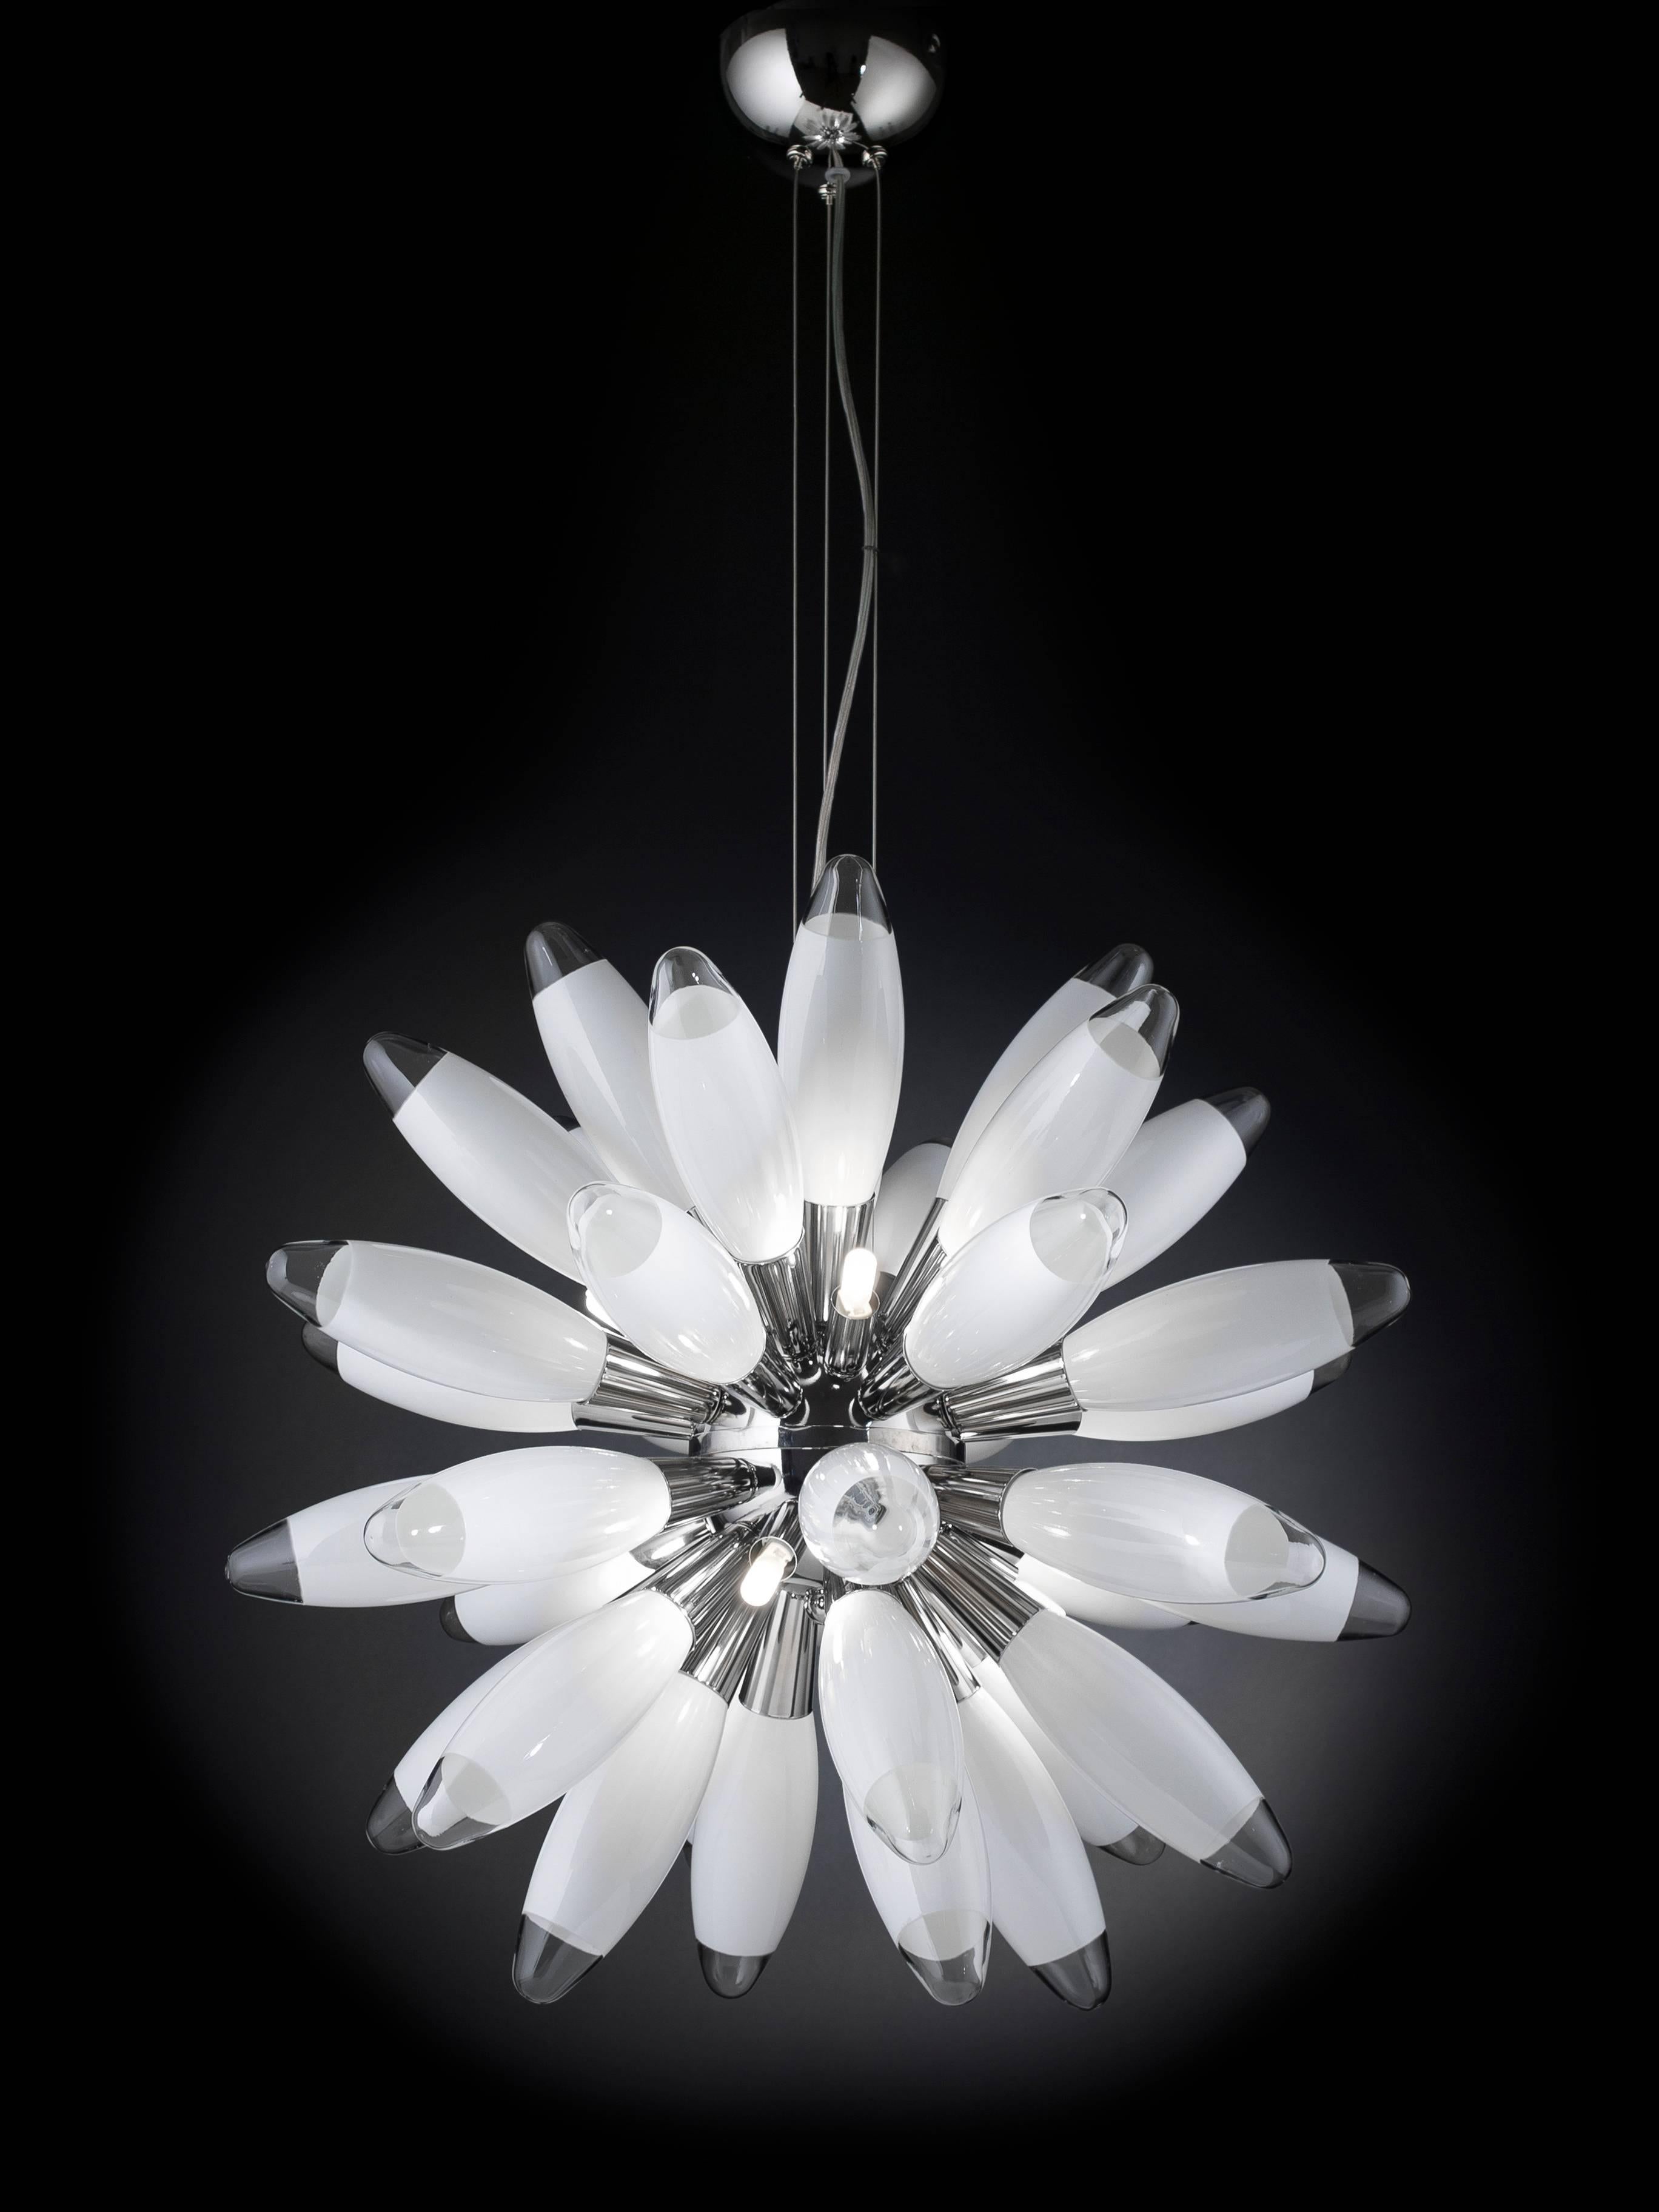 Italian torpedo sputnik chandelier with 36 white hand blown glasses, mounted on chrome finish / Designed by Fabio Bergomi for Fabio Ltd / Made in Italy
6 lights / G9 type / max 40W each
Height: 21.5 inches plus cables and canopy / Diameter: 21.5